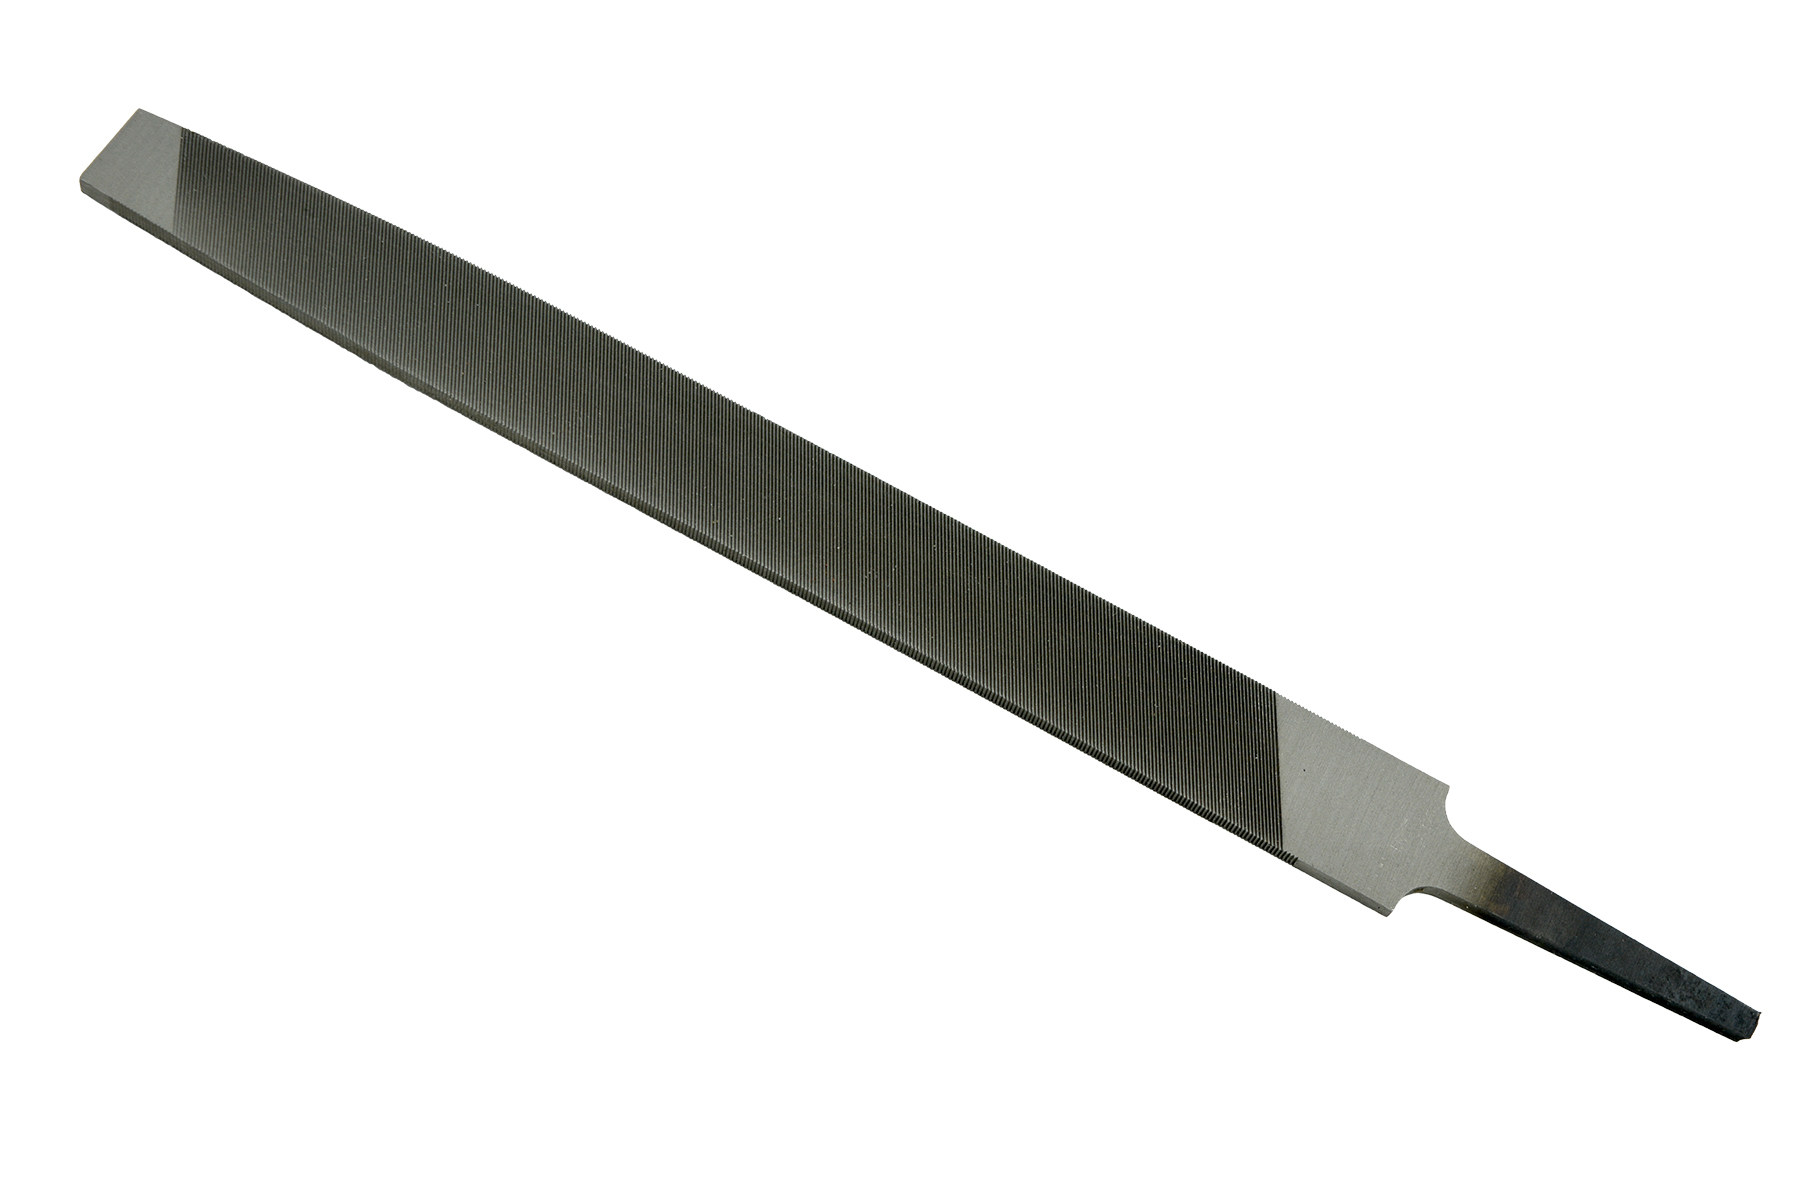 Zenport Deluxe Sharpening File AGF200AA High Quality Mill Bastard File, 8-Inch (200 mm), for sharpening pruners and knives